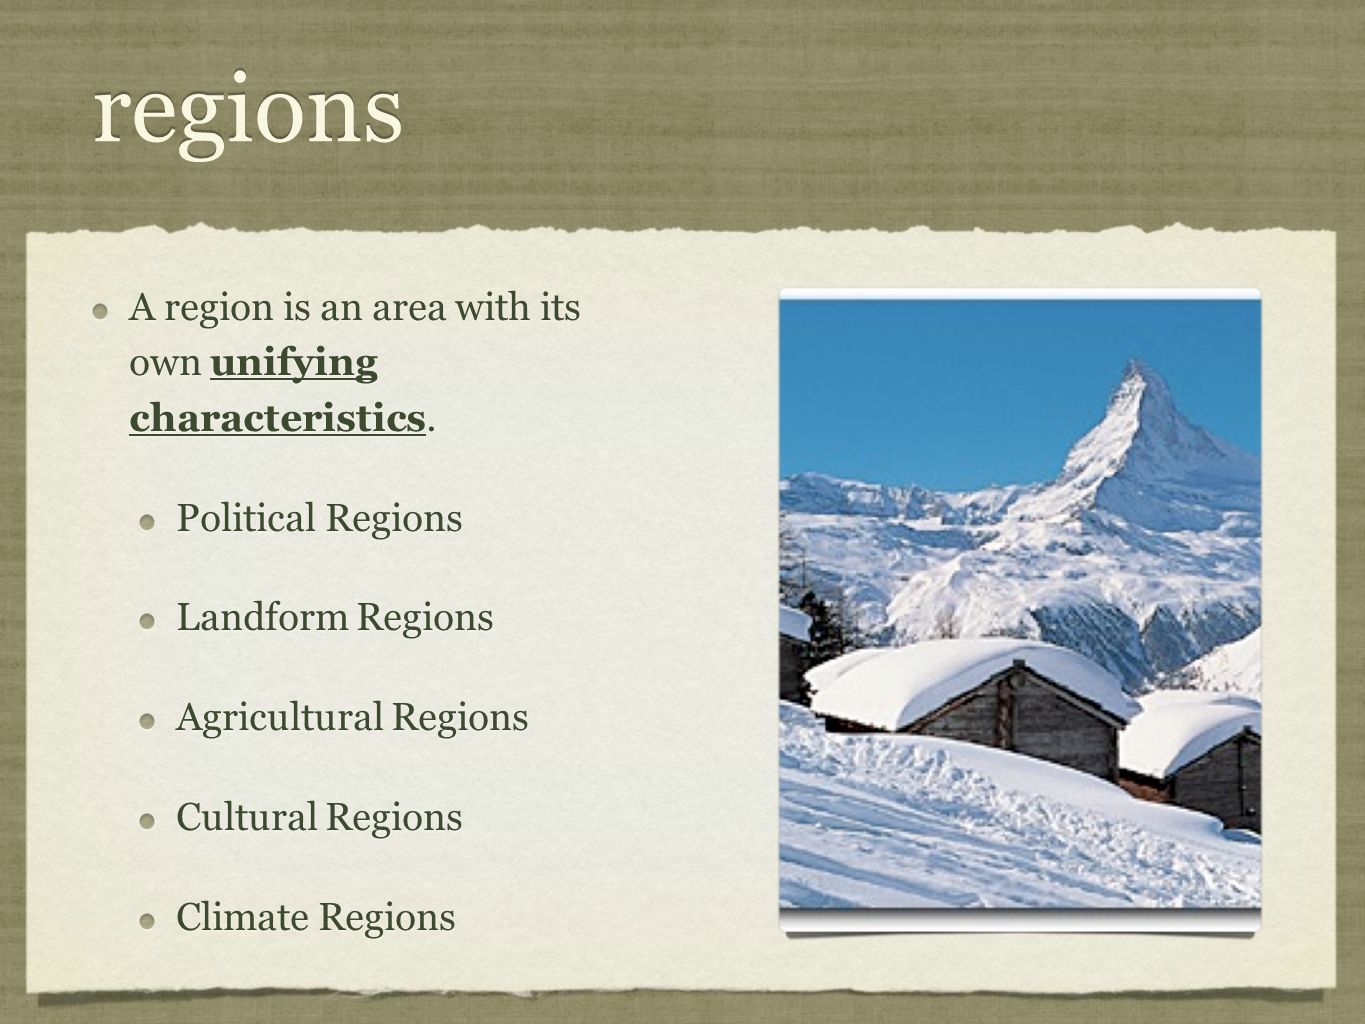 regions A region is an area with its own unifying characteristics.